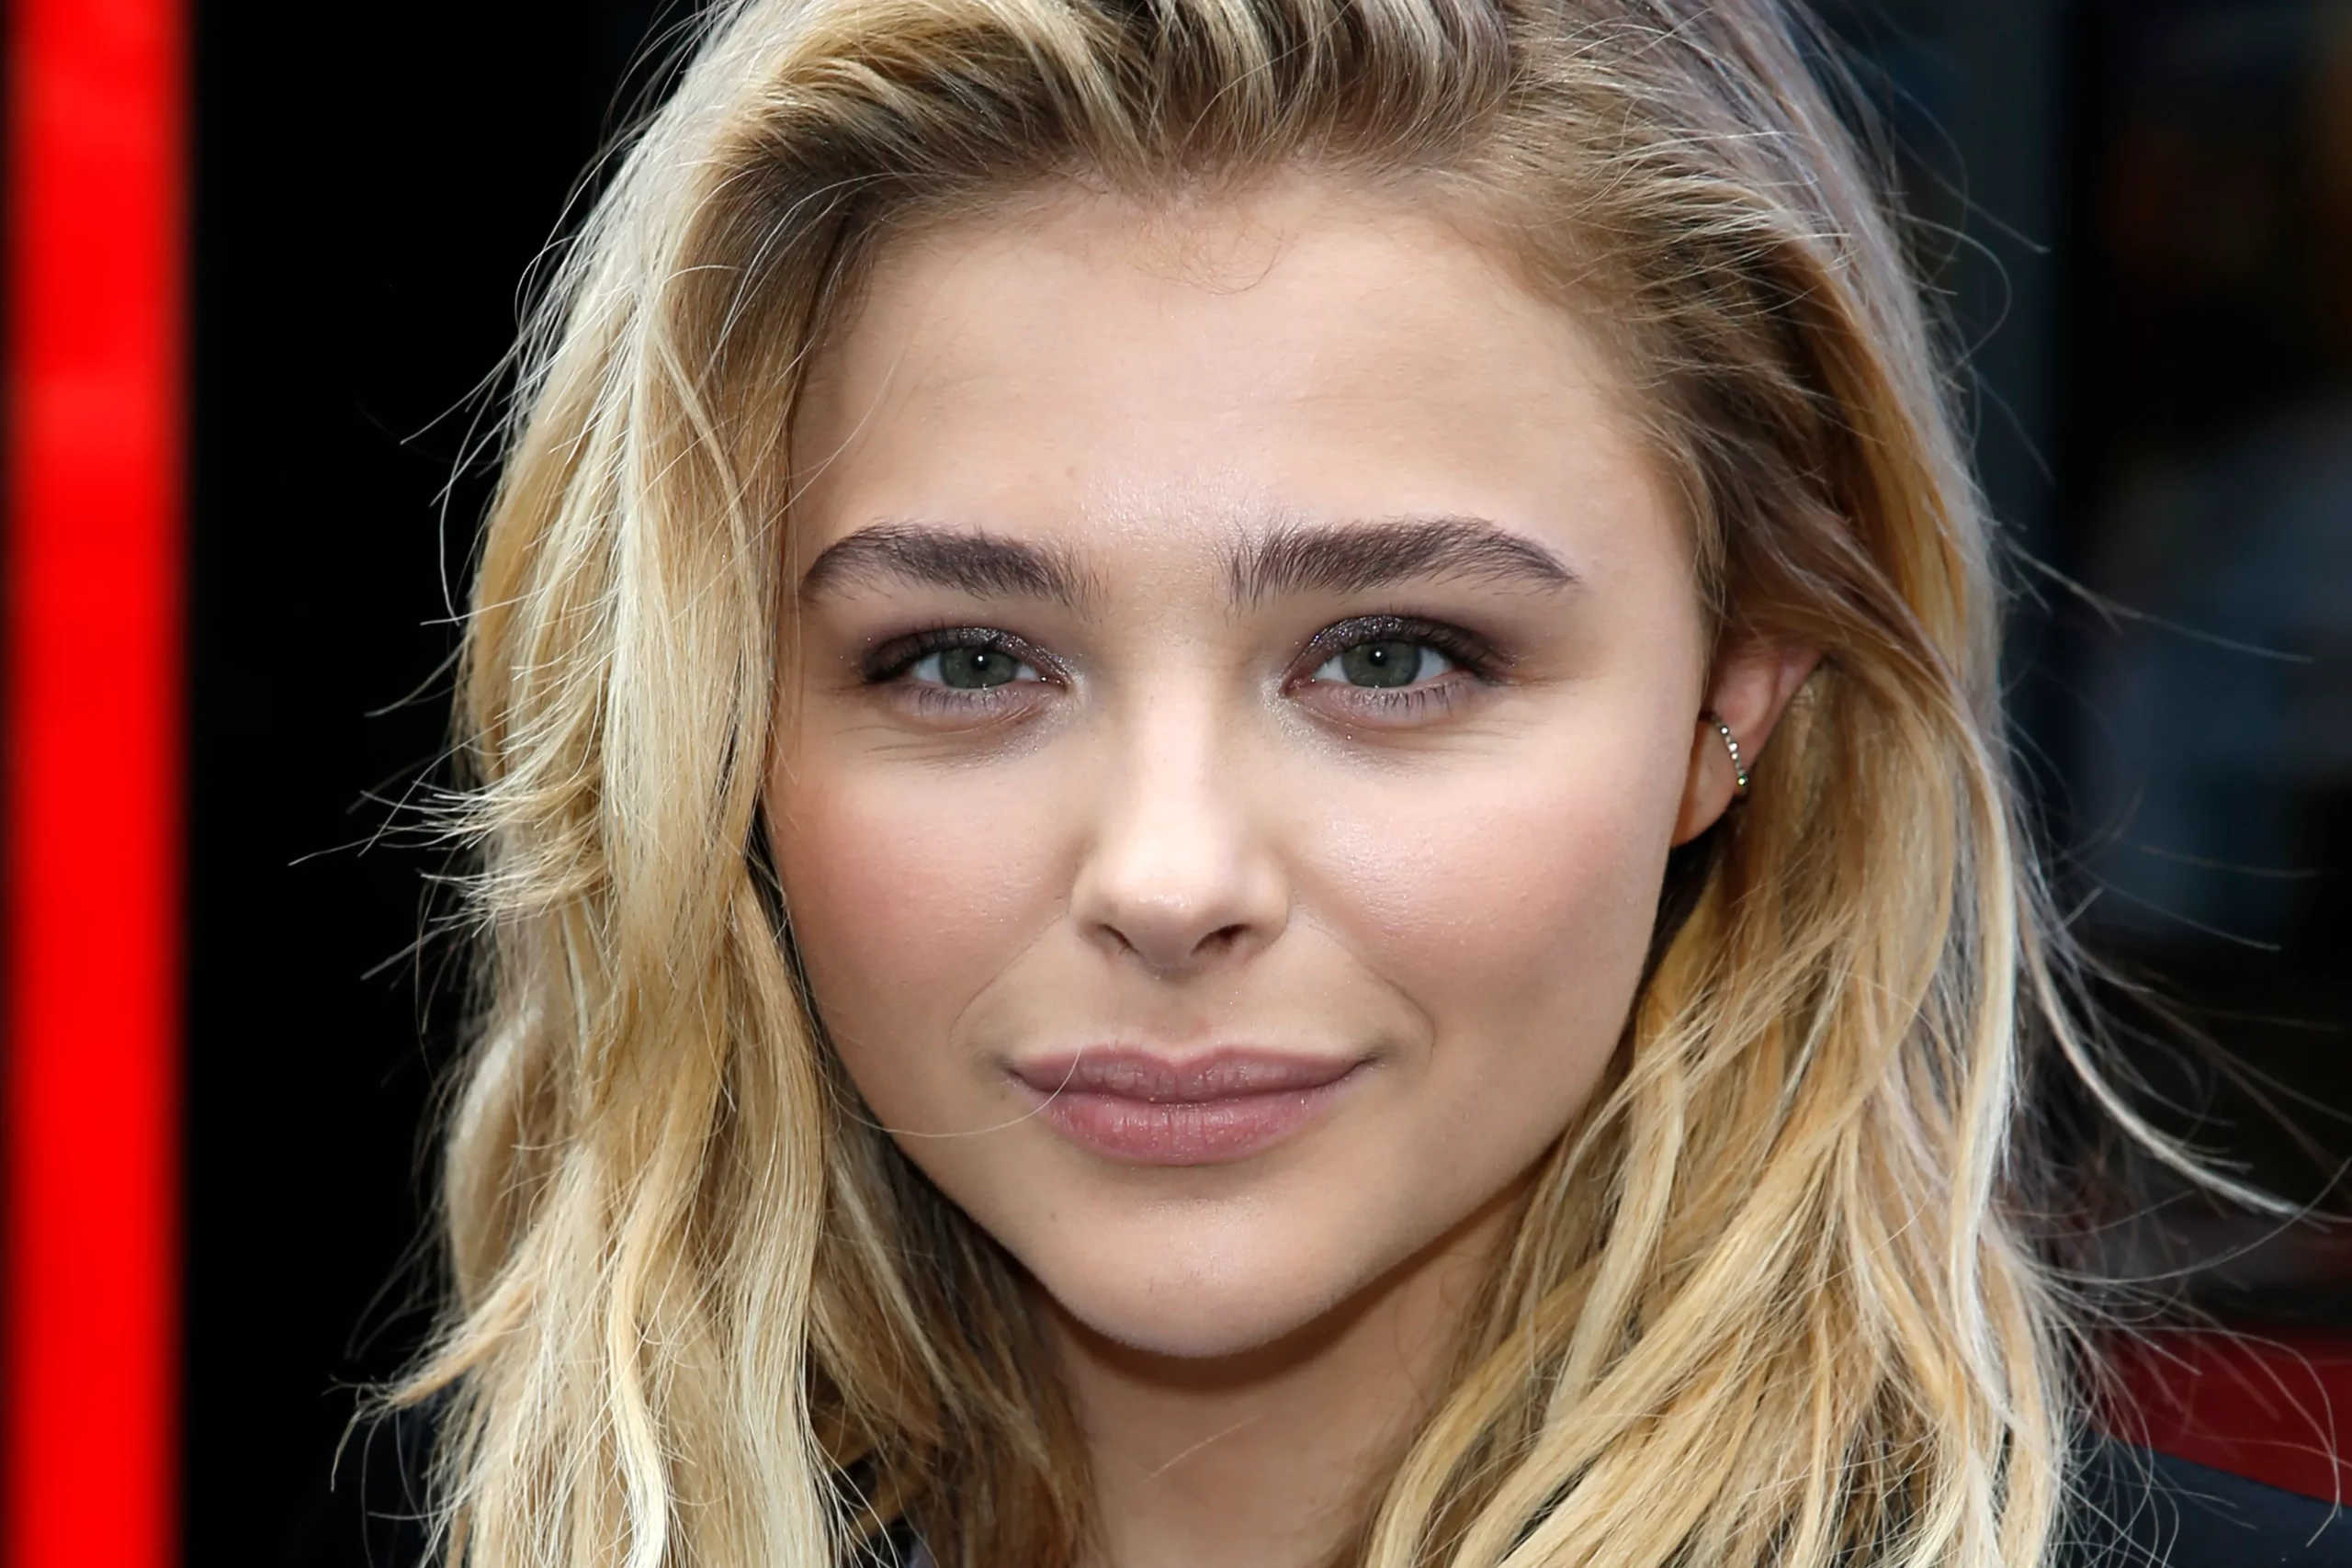 Hottest Young Female Celebrities in the World-Chloe Moretz